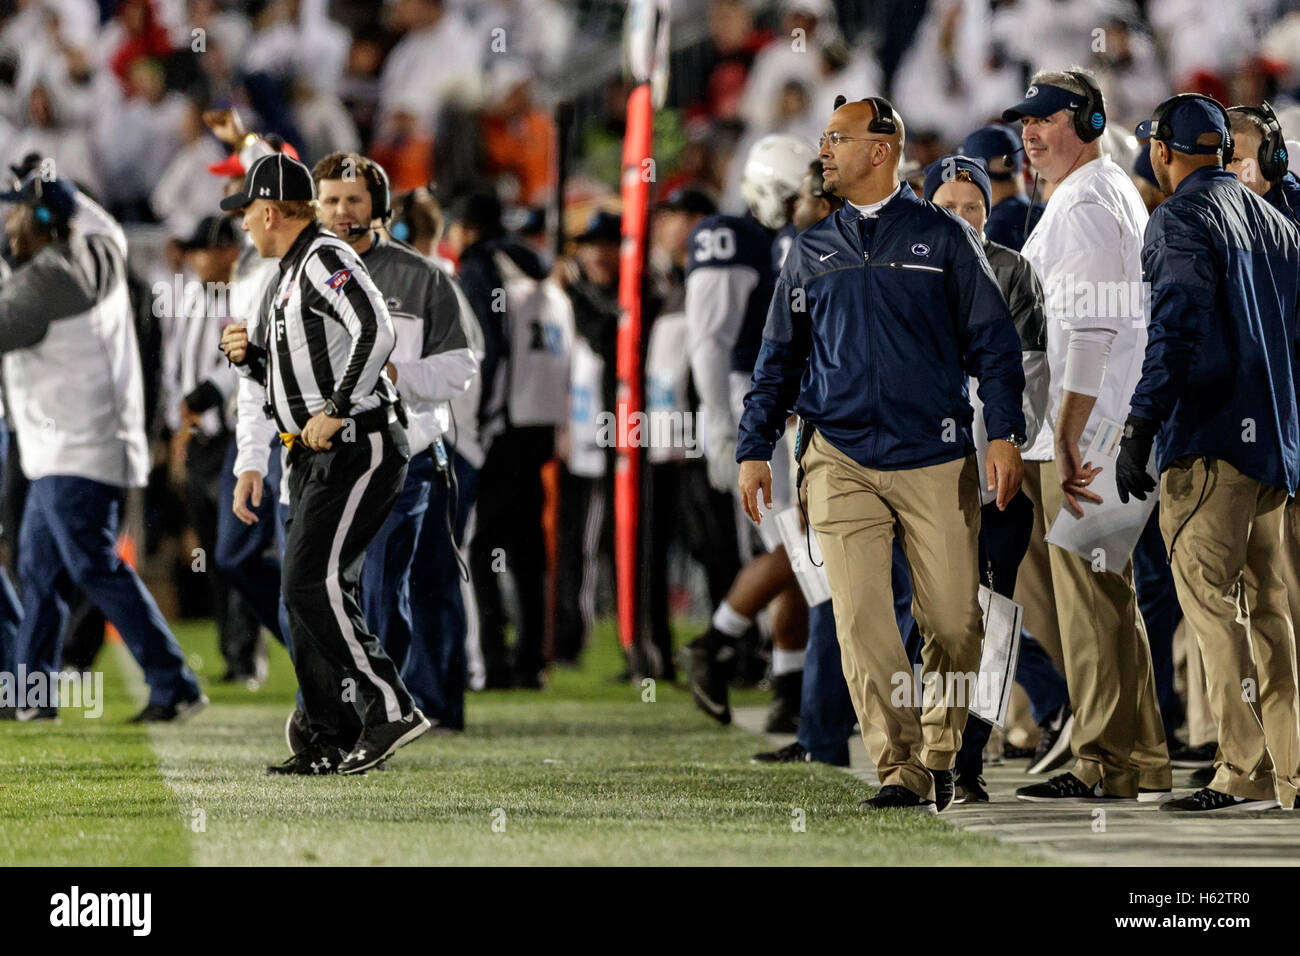 University Park, Pennsylvania, USA. 21st Oct, 2016. October 22nd, 2016: Penn State Nittany Lions head coach James Franklin during NCAA football game action between the Ohio State Buckeyes and the Penn State Nittany Lions at Beaver Stadium, University Park, PA. Photo by Adam Lacy/Zuma Wire © Adam Lacy/ZUMA Wire/Alamy Live News Stock Photo